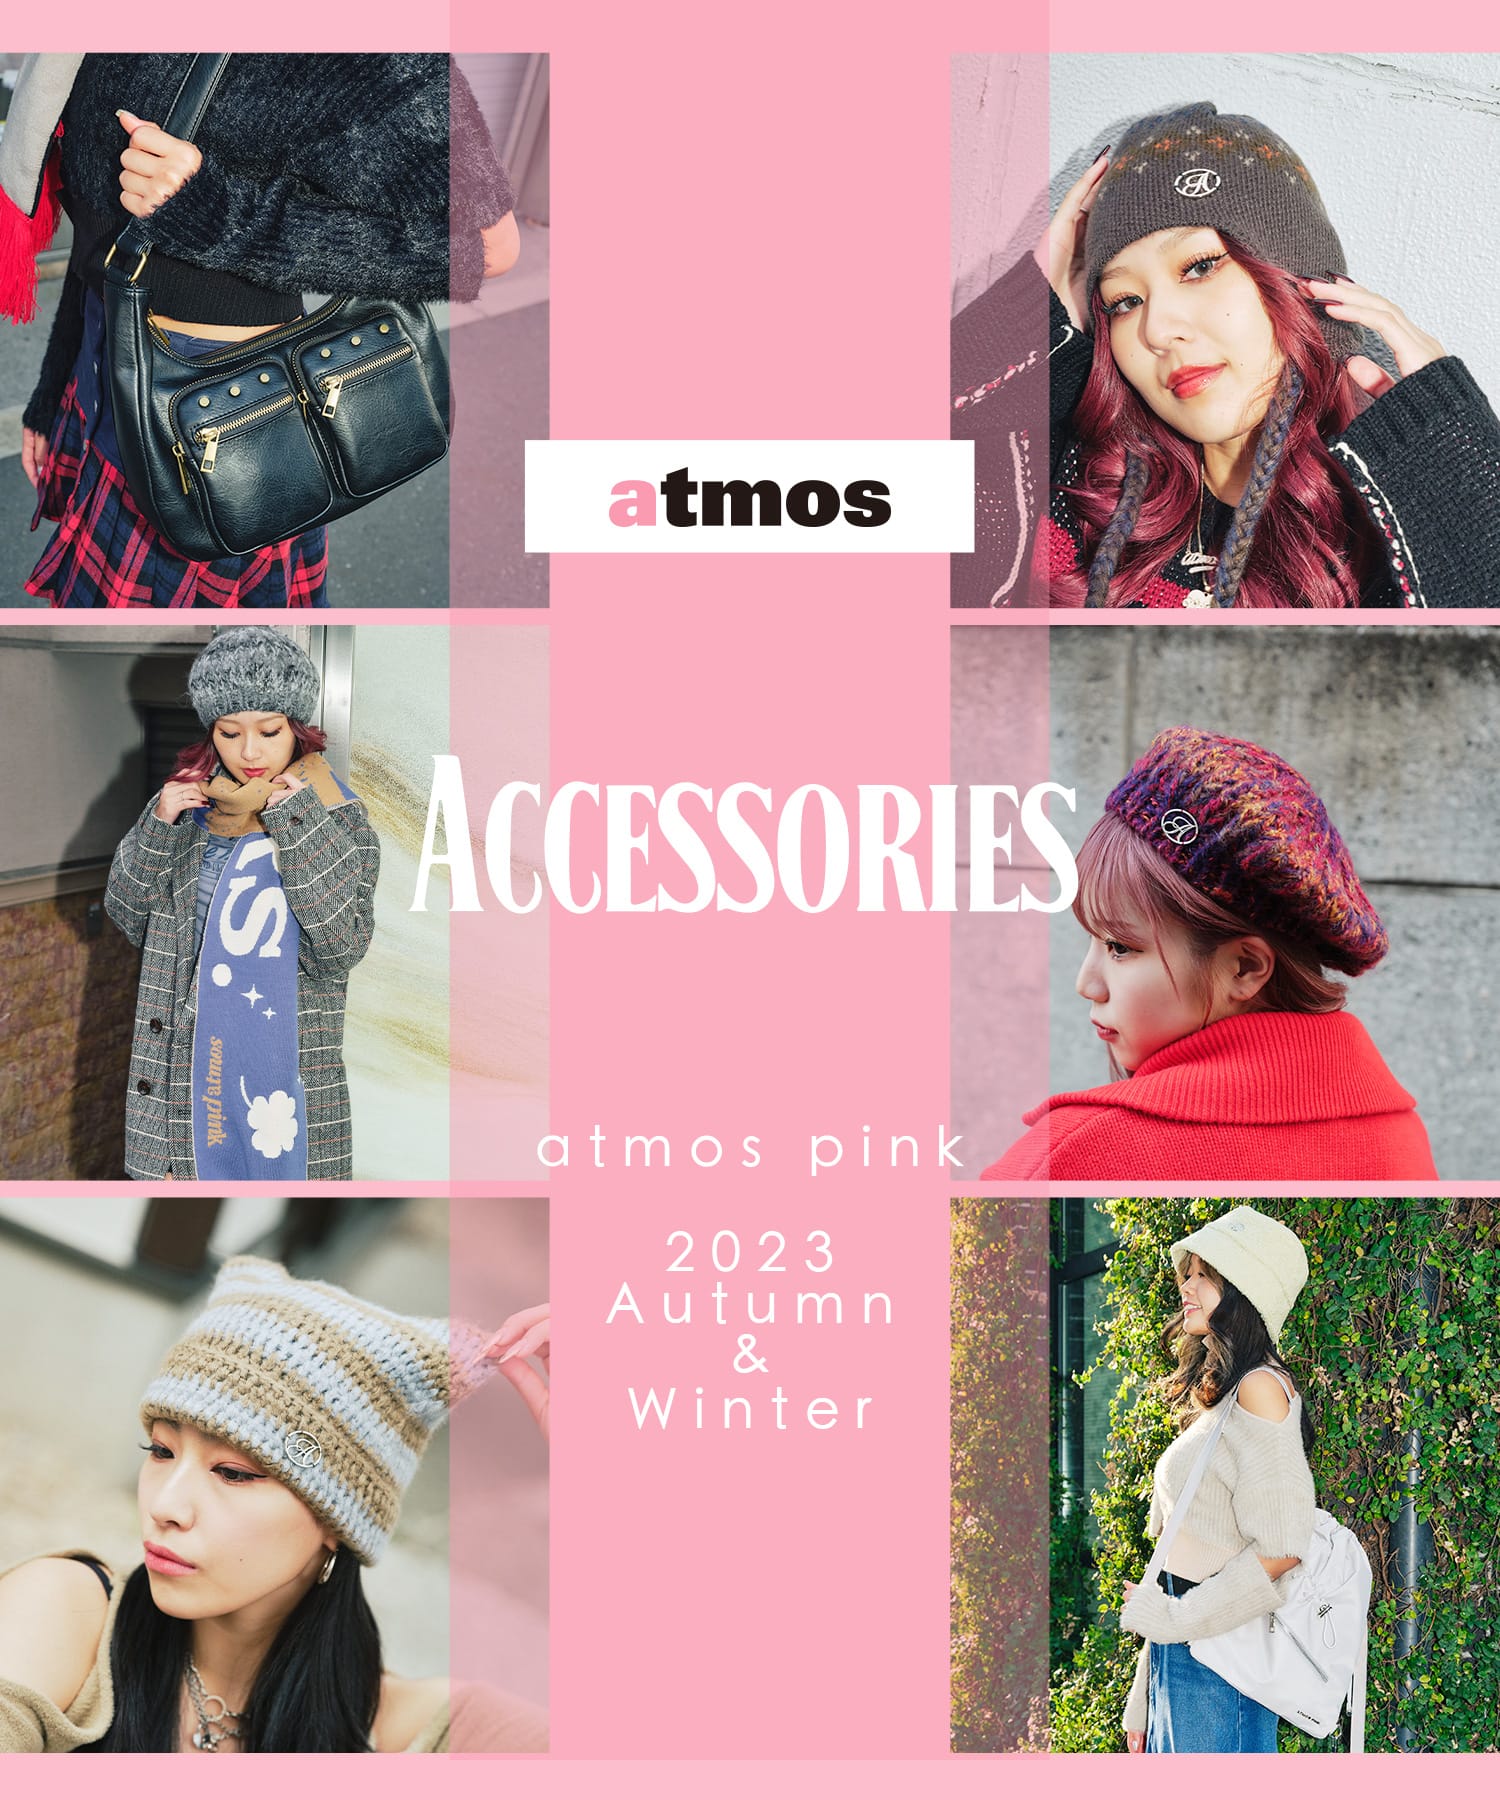 atmos pink 23AW Accessories